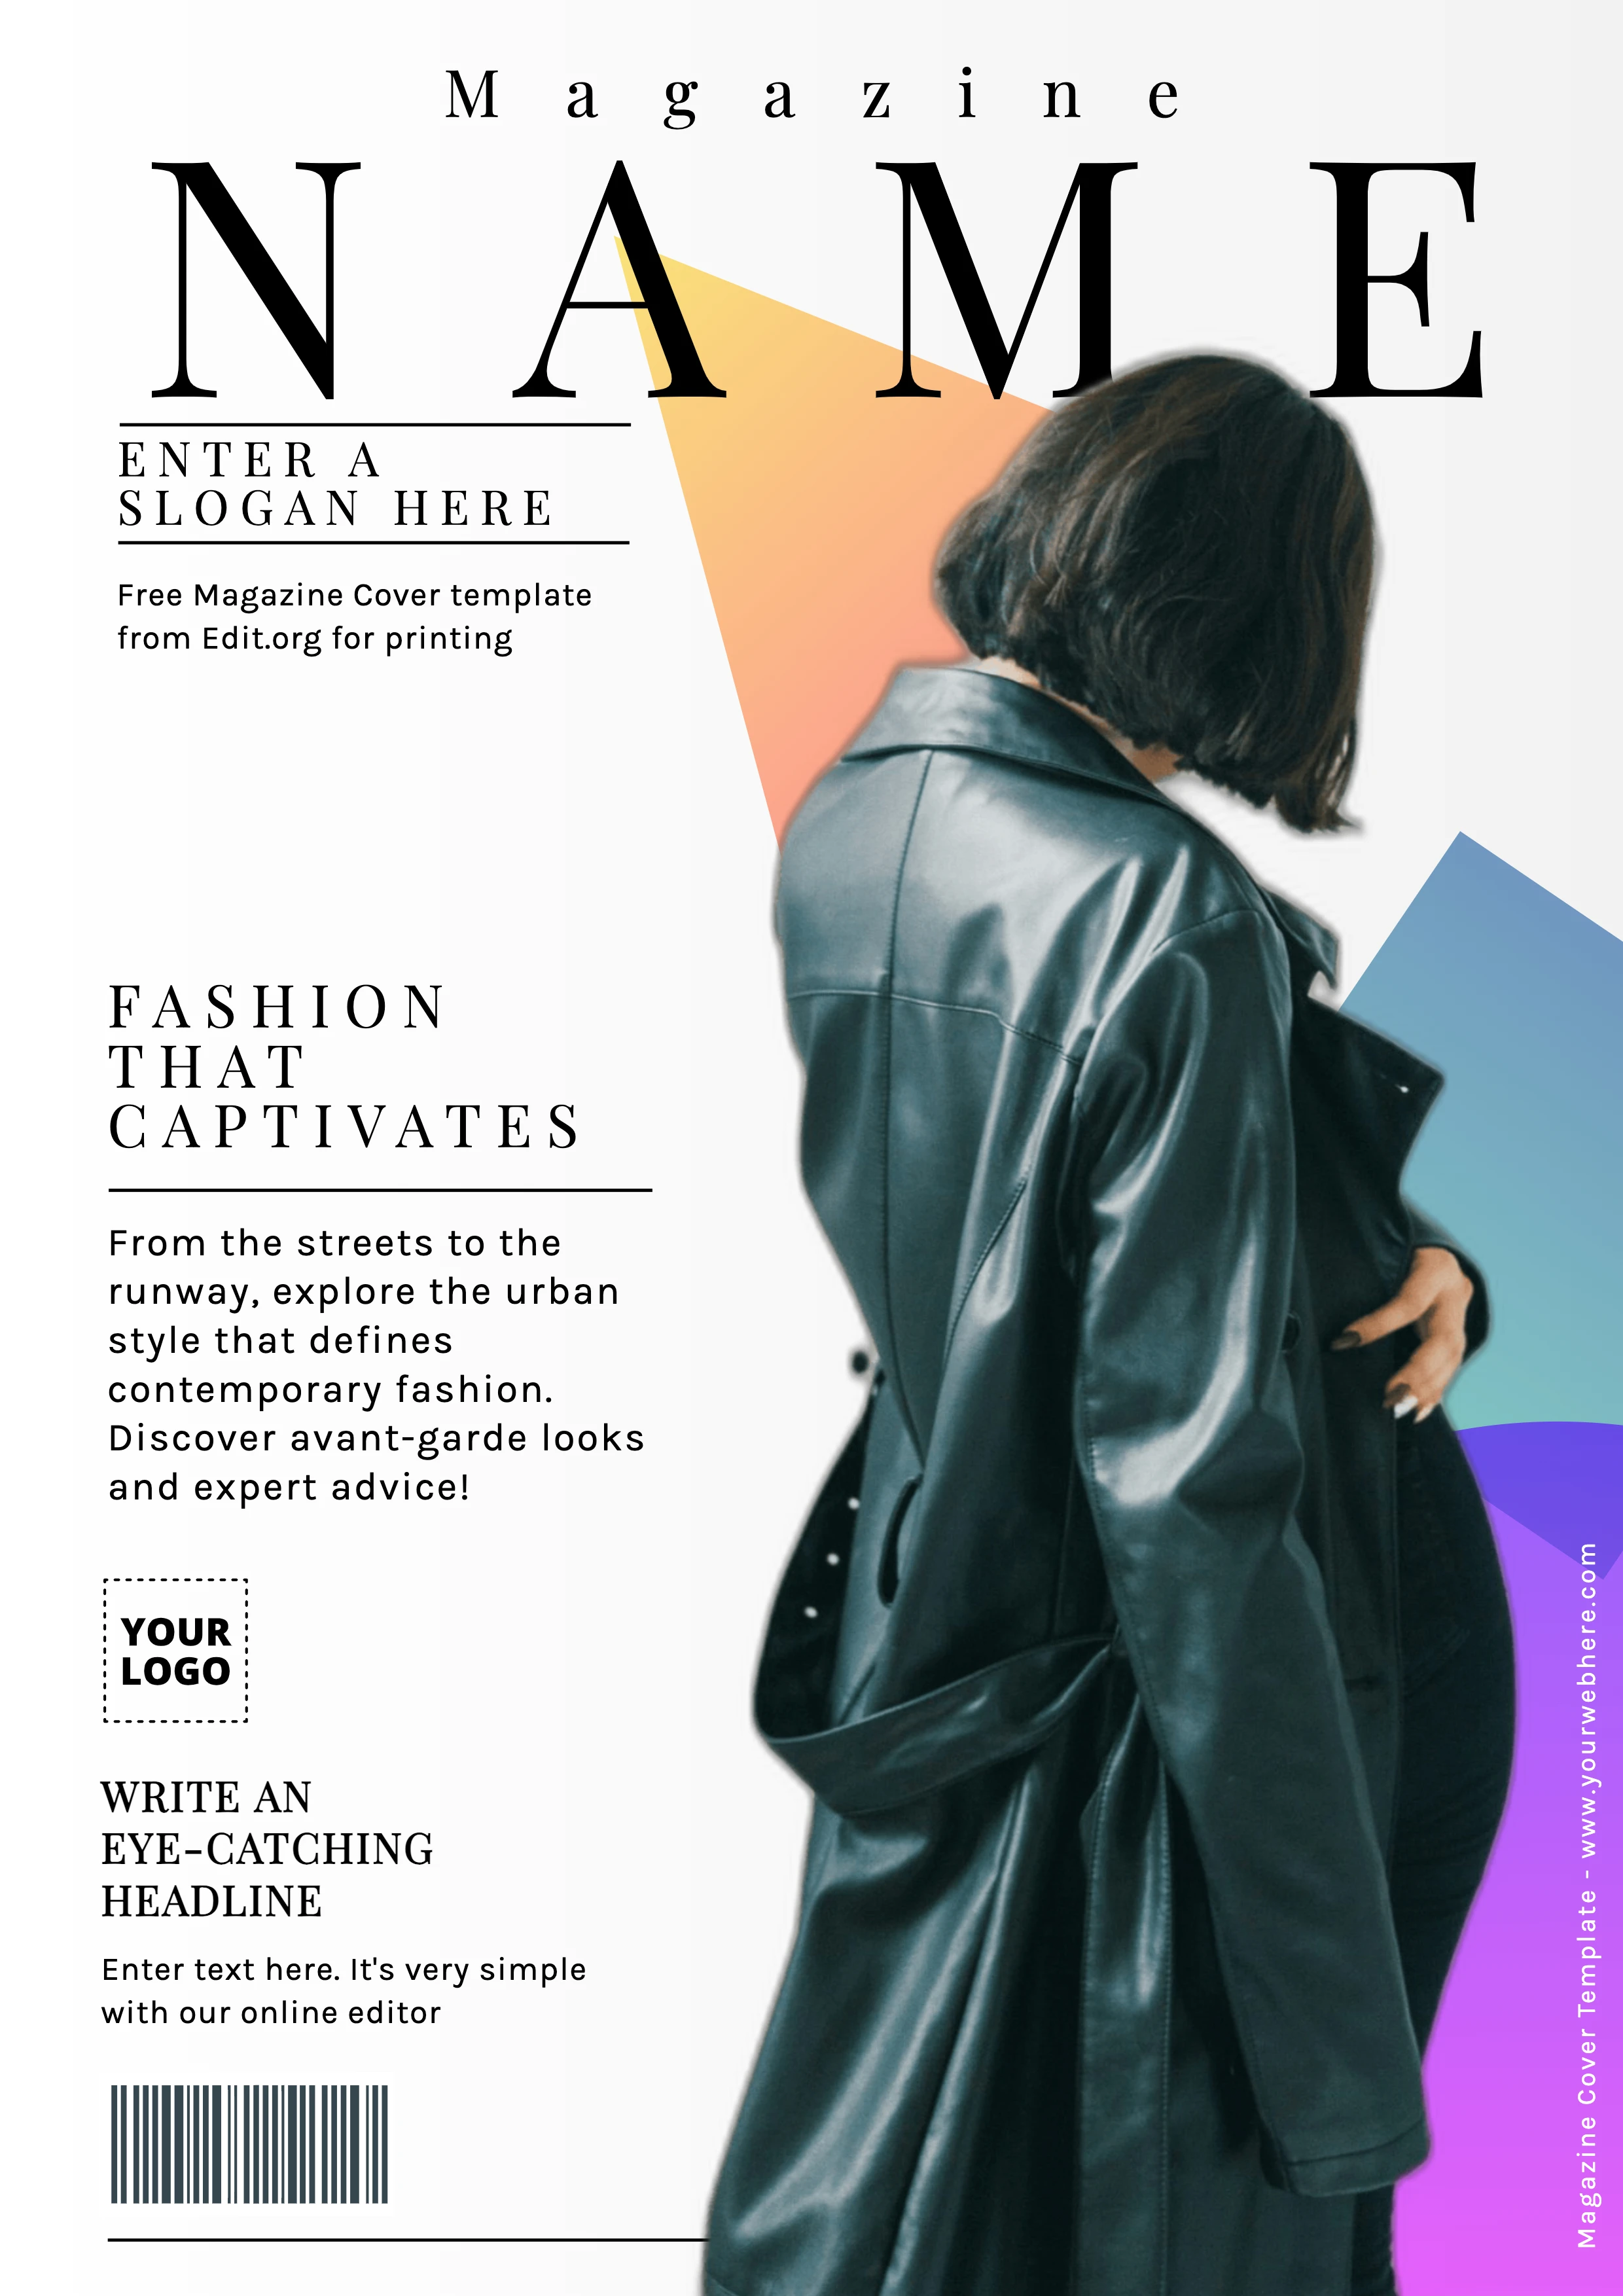 Magazine Cover Page design templates free download